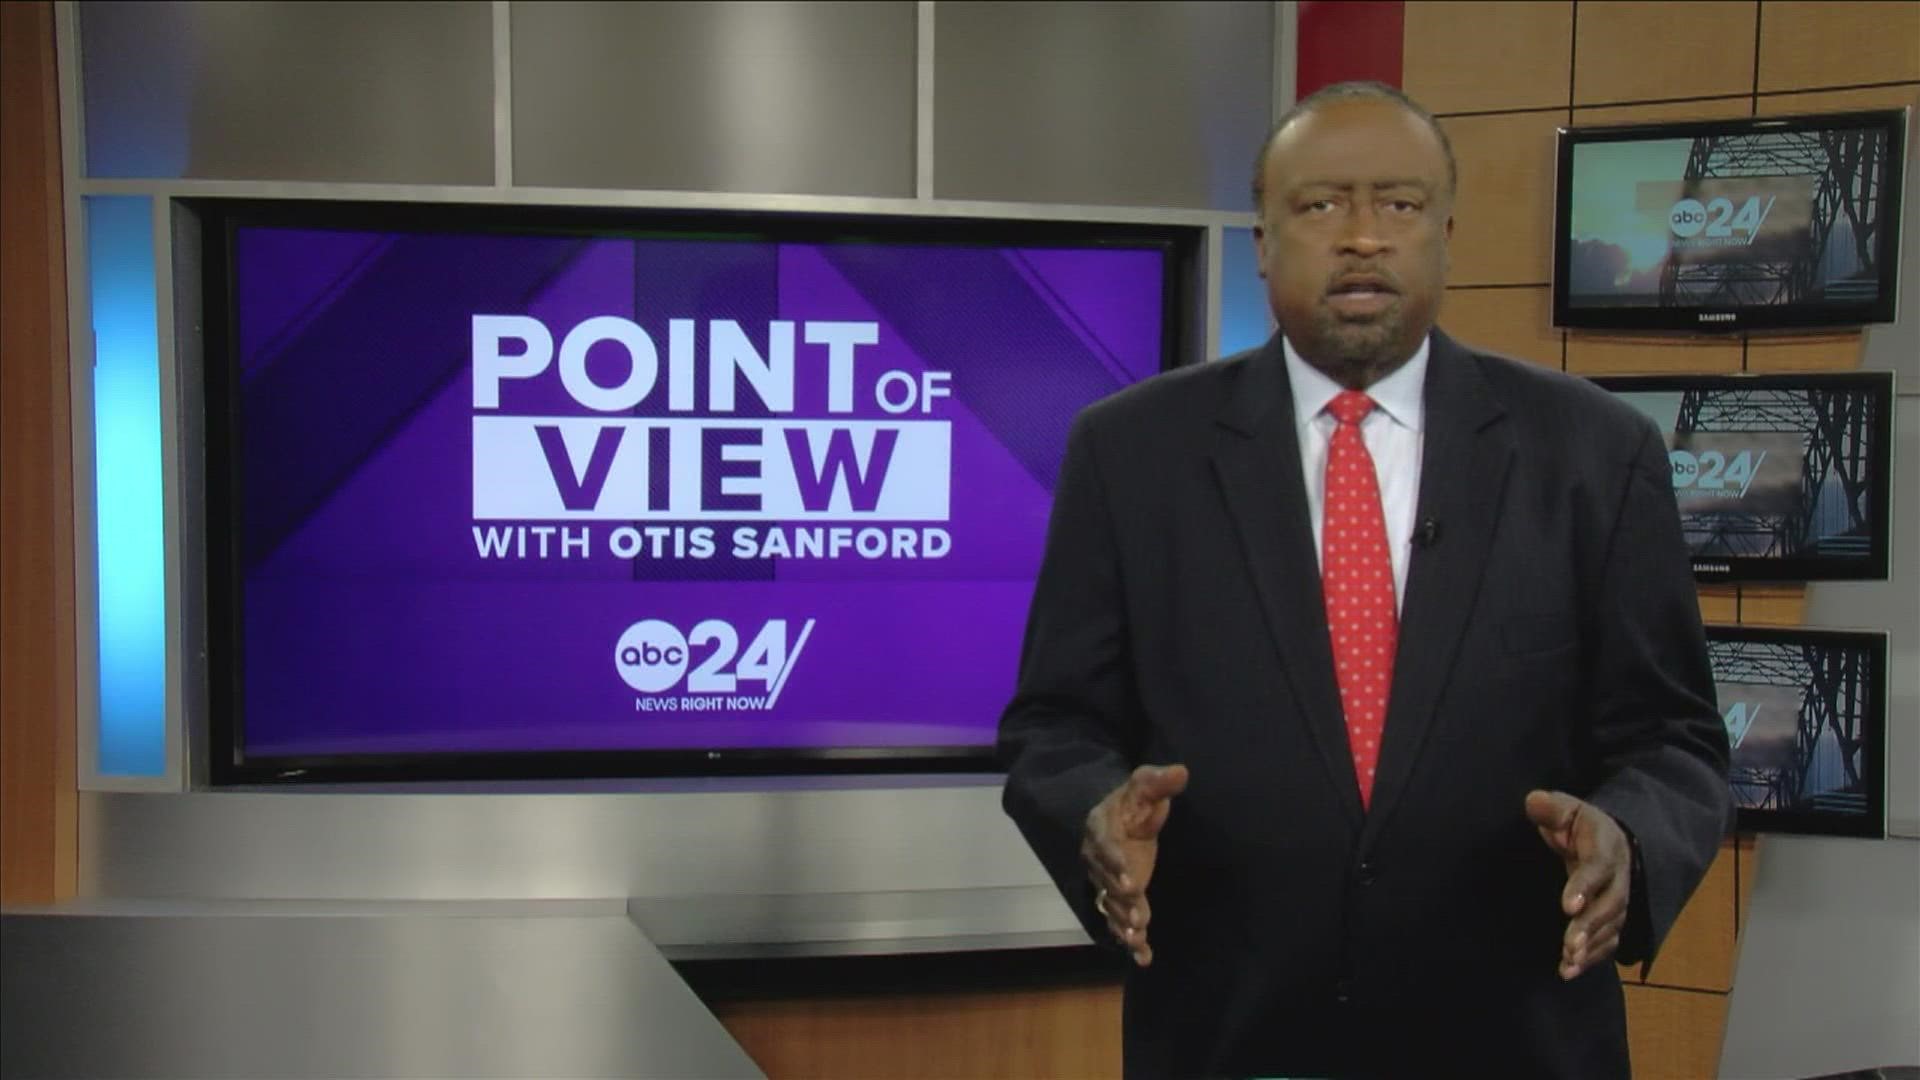 ABC24 political analyst and commentator Otis Sanford shared his point of view on a troubling report on Parchman prison in Mississippi.